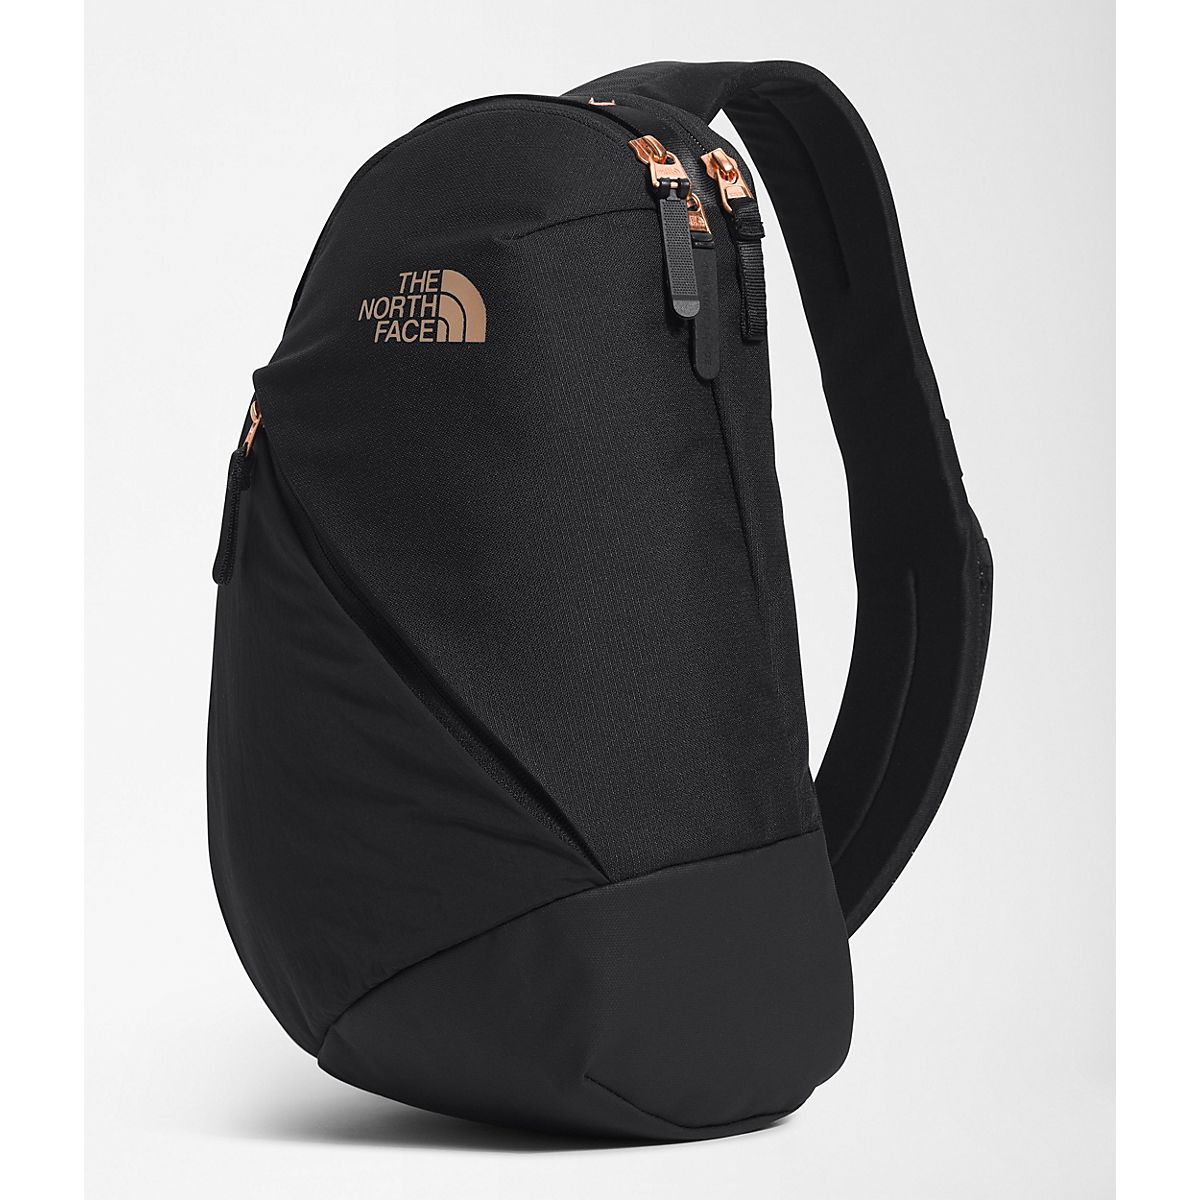 The North Face Women's Isabella Sling Bag | Academy